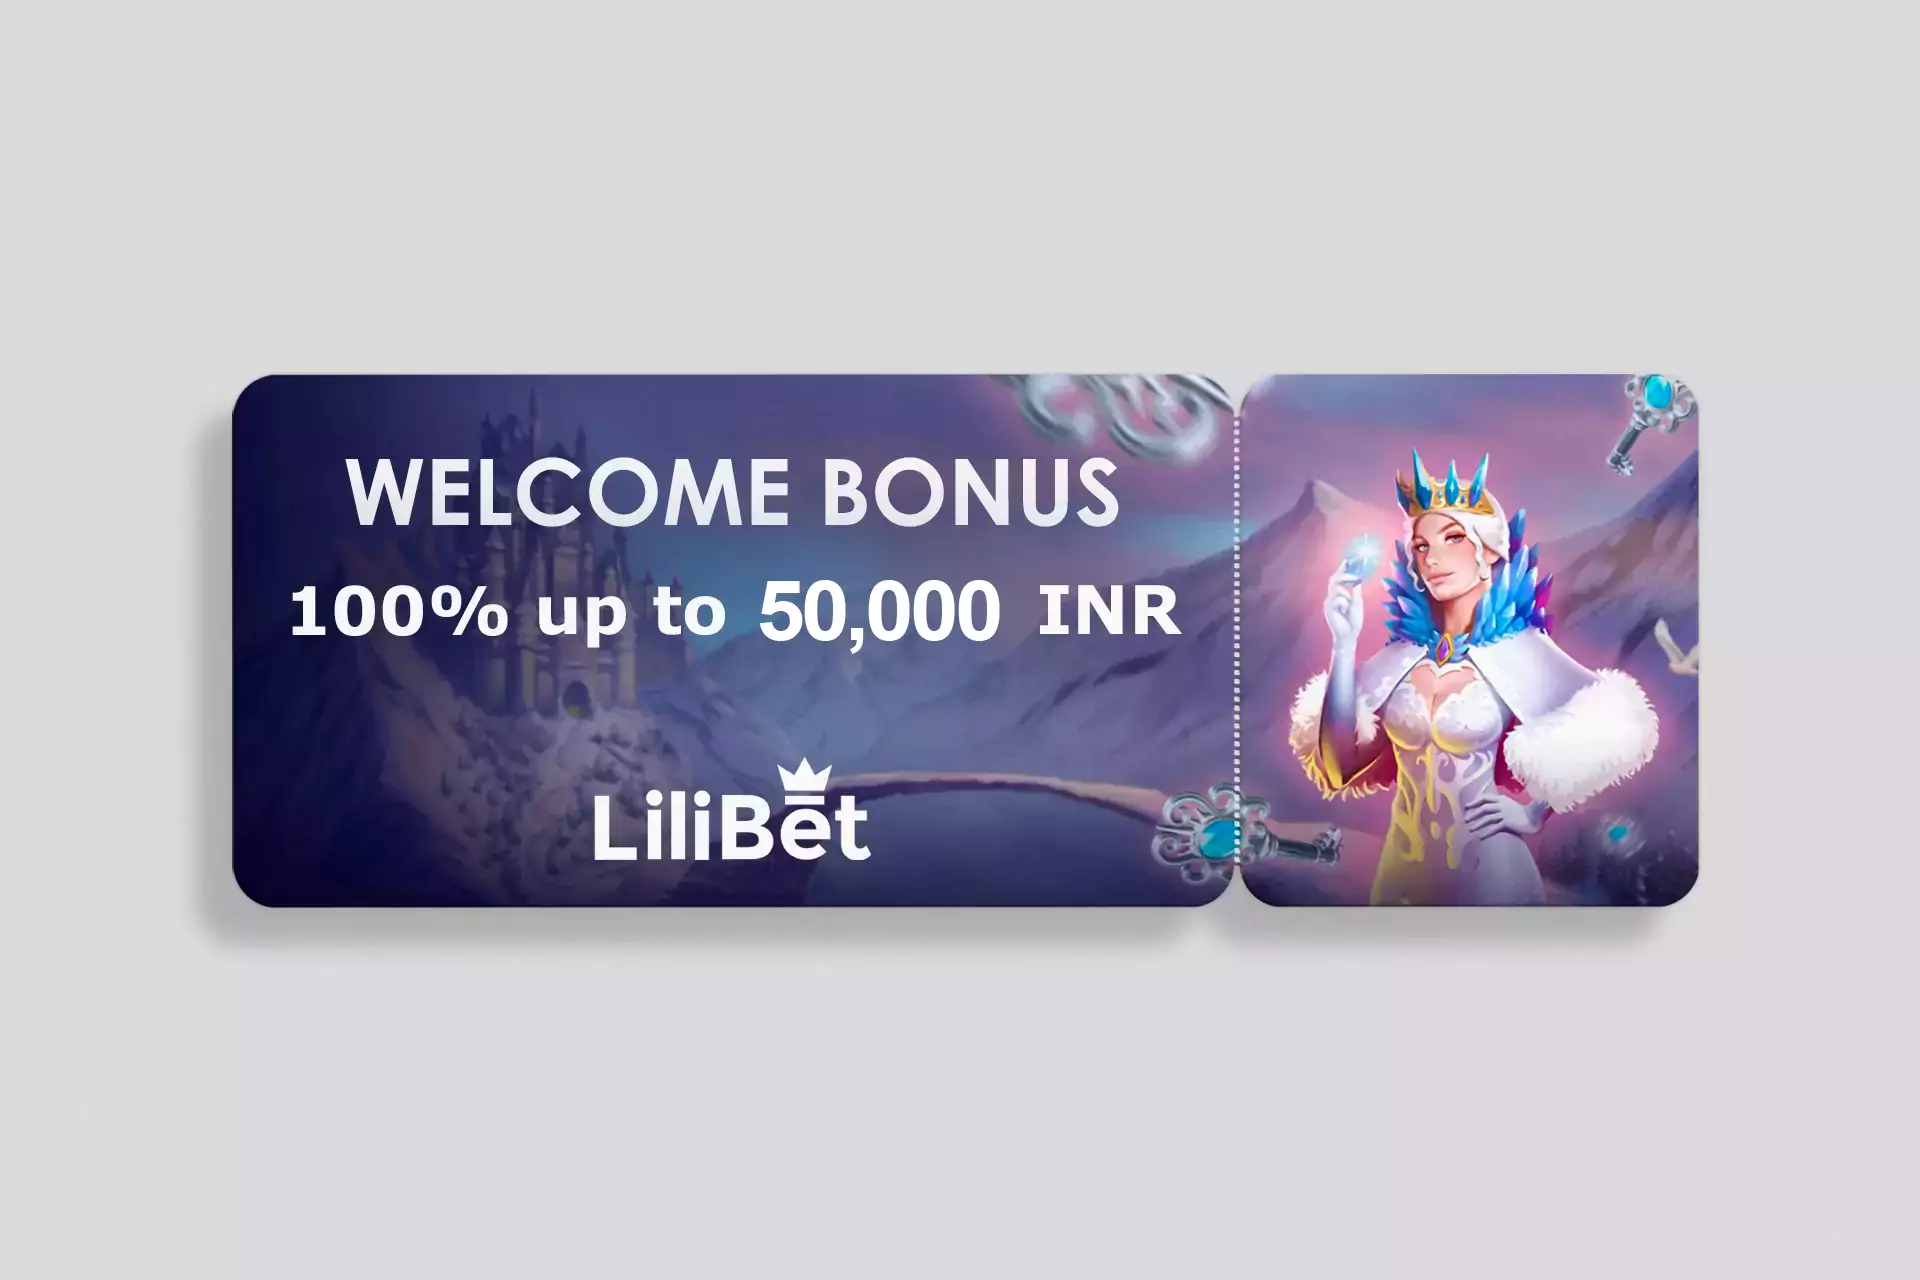 For new users, there is an offer to get a welcome bonus of up to 50000 INR.